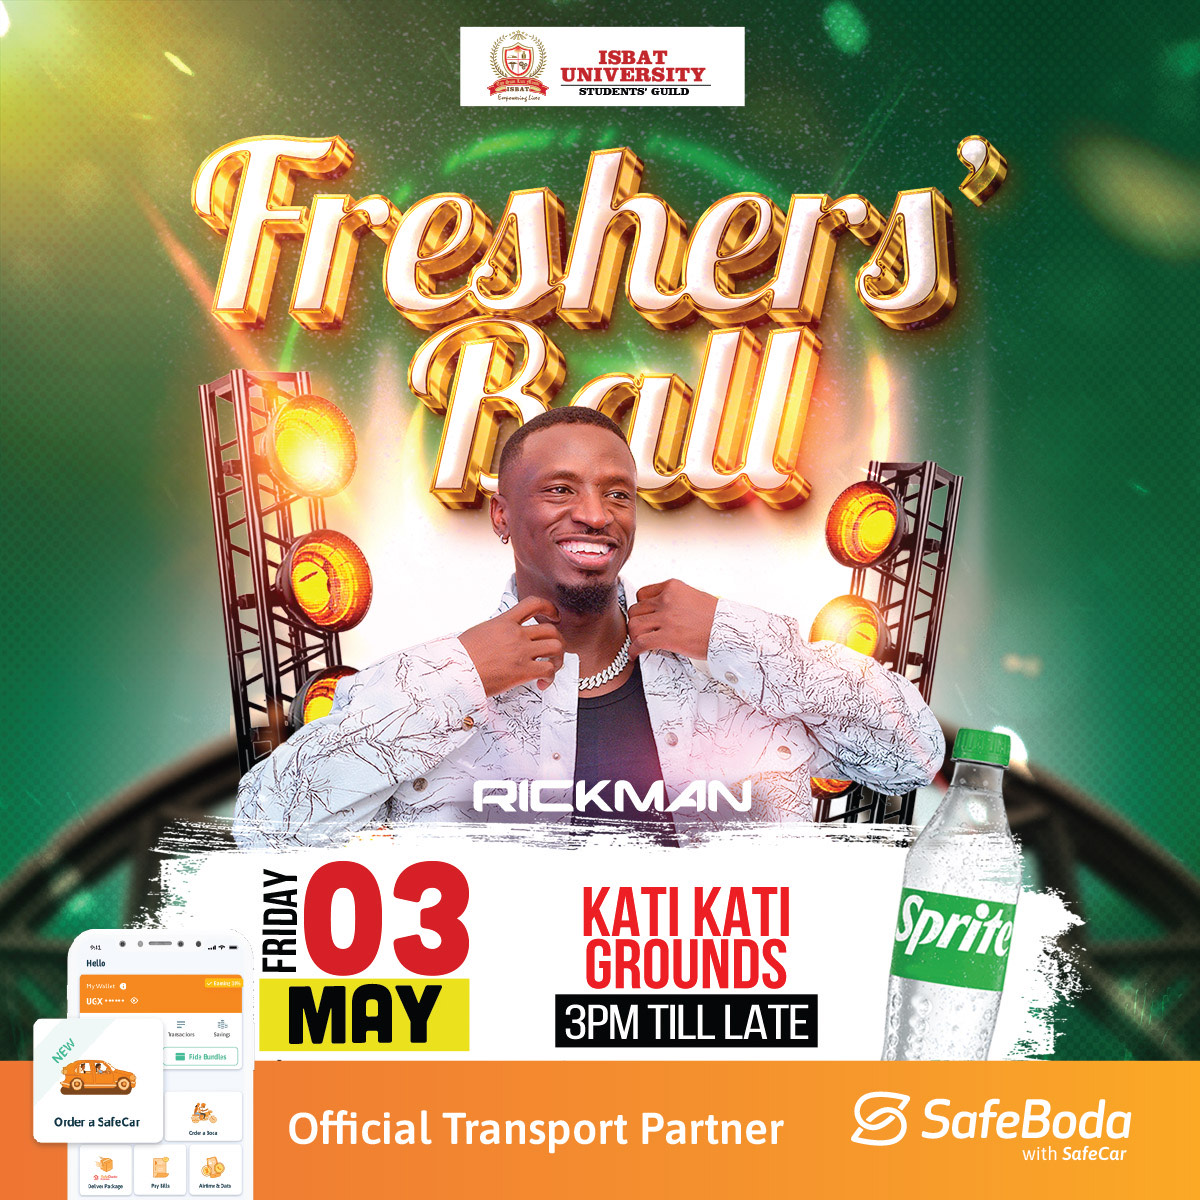 Exciting News 🎉 We are thrilled to be the Official Transport Partner for the Isbat Freshers' Ball on May 3rd at Kati Kati Grounds. Your SAFEST ride awaits - Order SafeCar 🚘 and SafeBoda 🏍️, we'll get you there!😎#IsbatFreshersBall